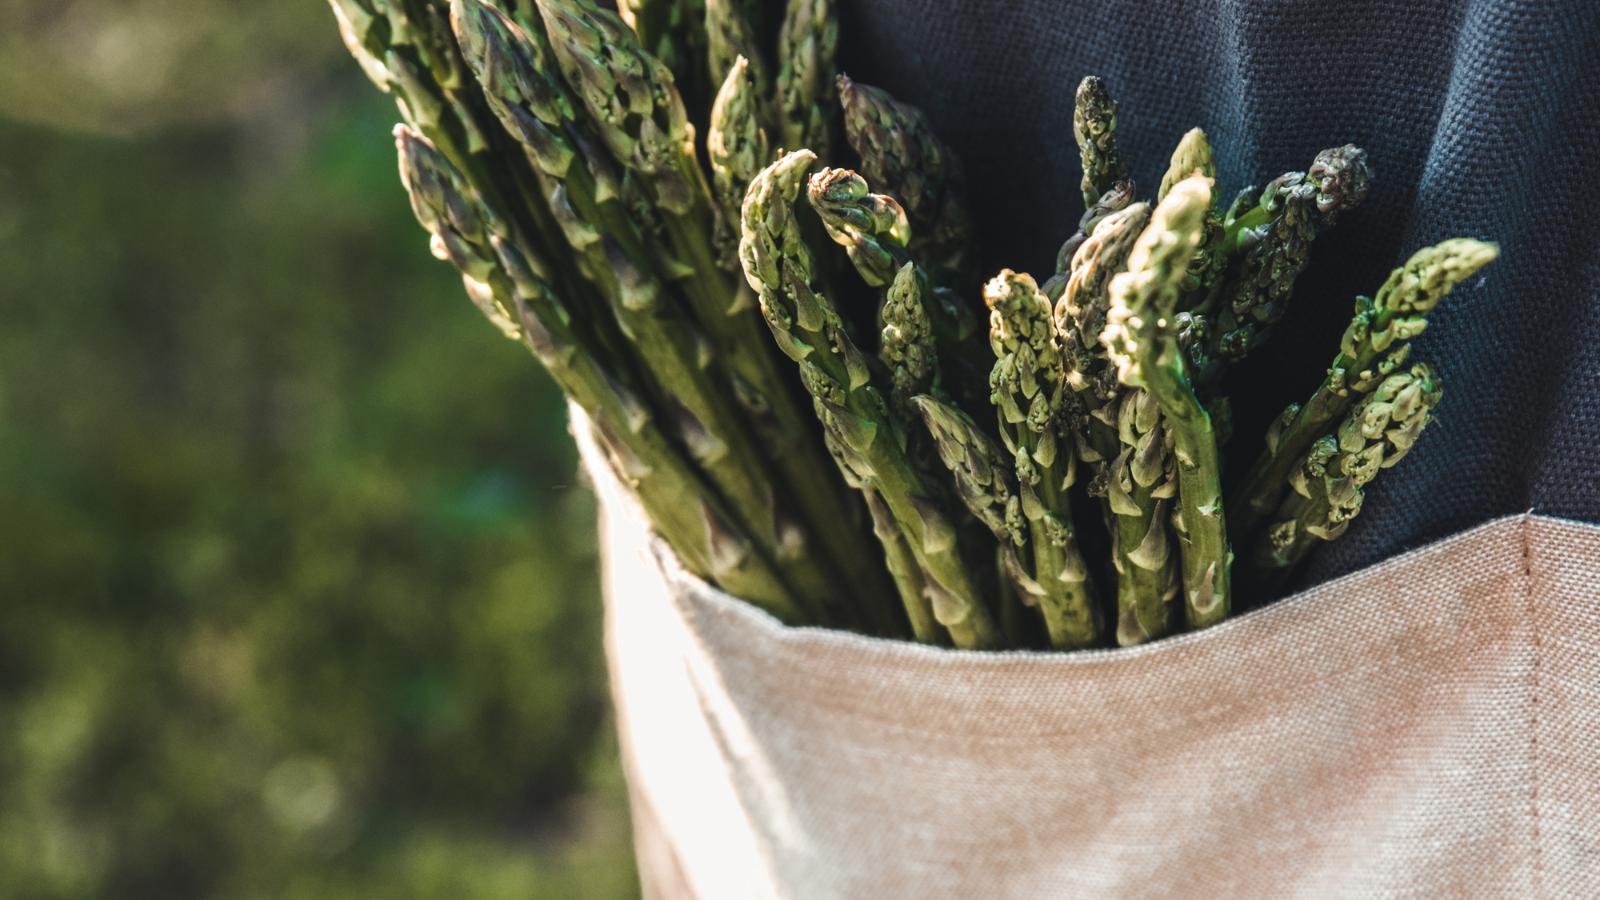 Asparagus spears grown from seeds after harvesting.